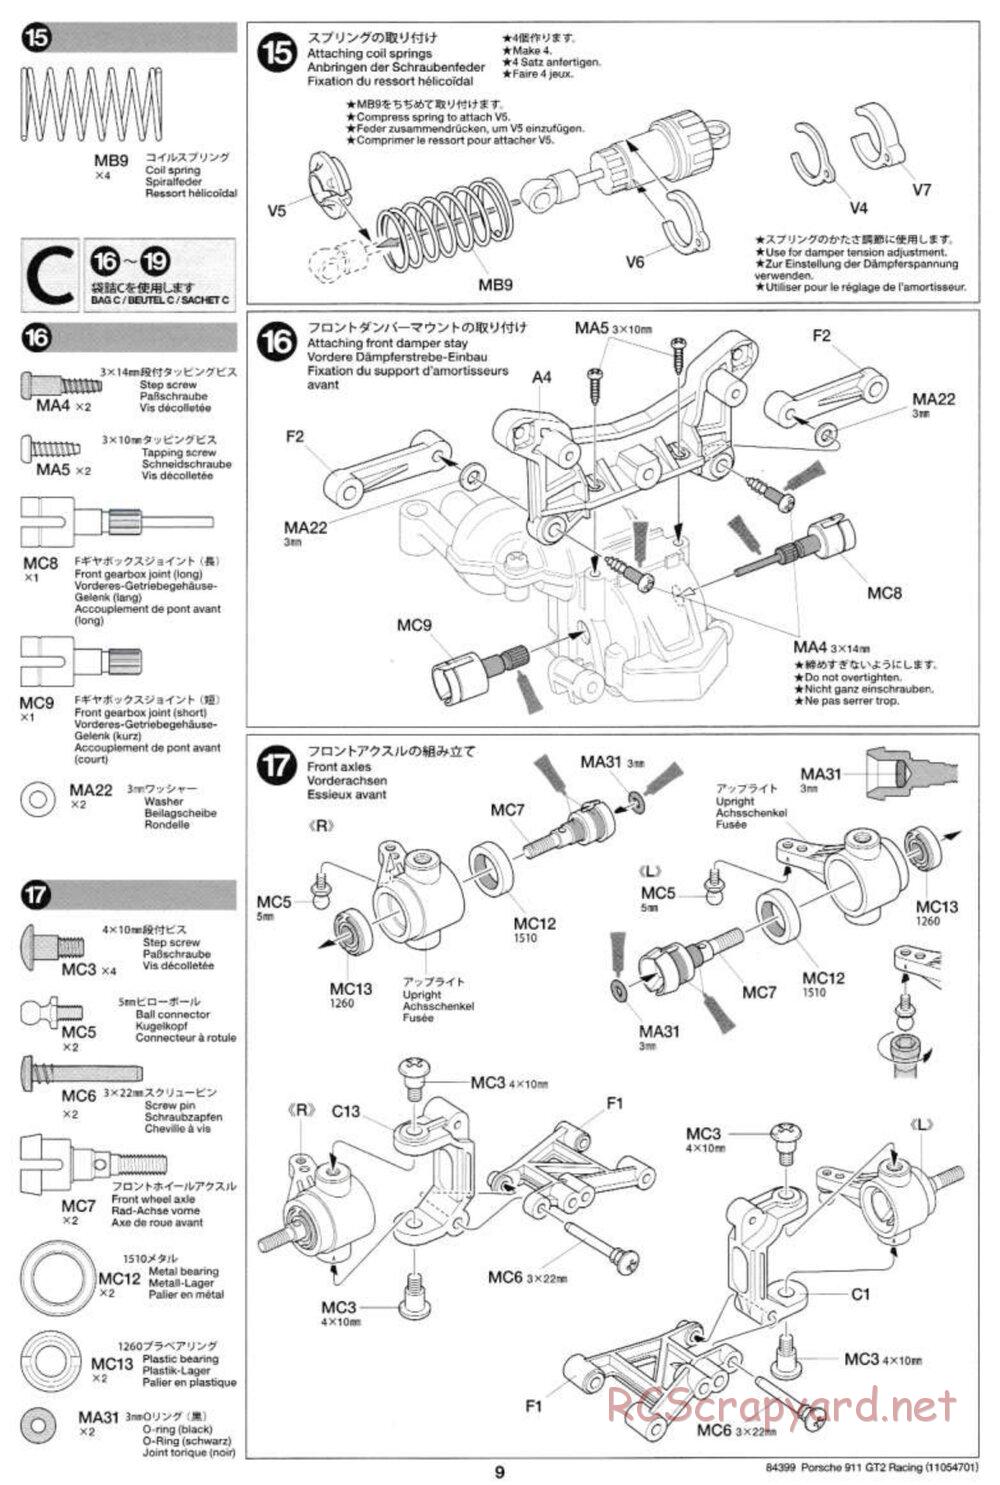 Tamiya - Porsche 911 GT2 Racing - TA-02SW Chassis - Manual - Page 9